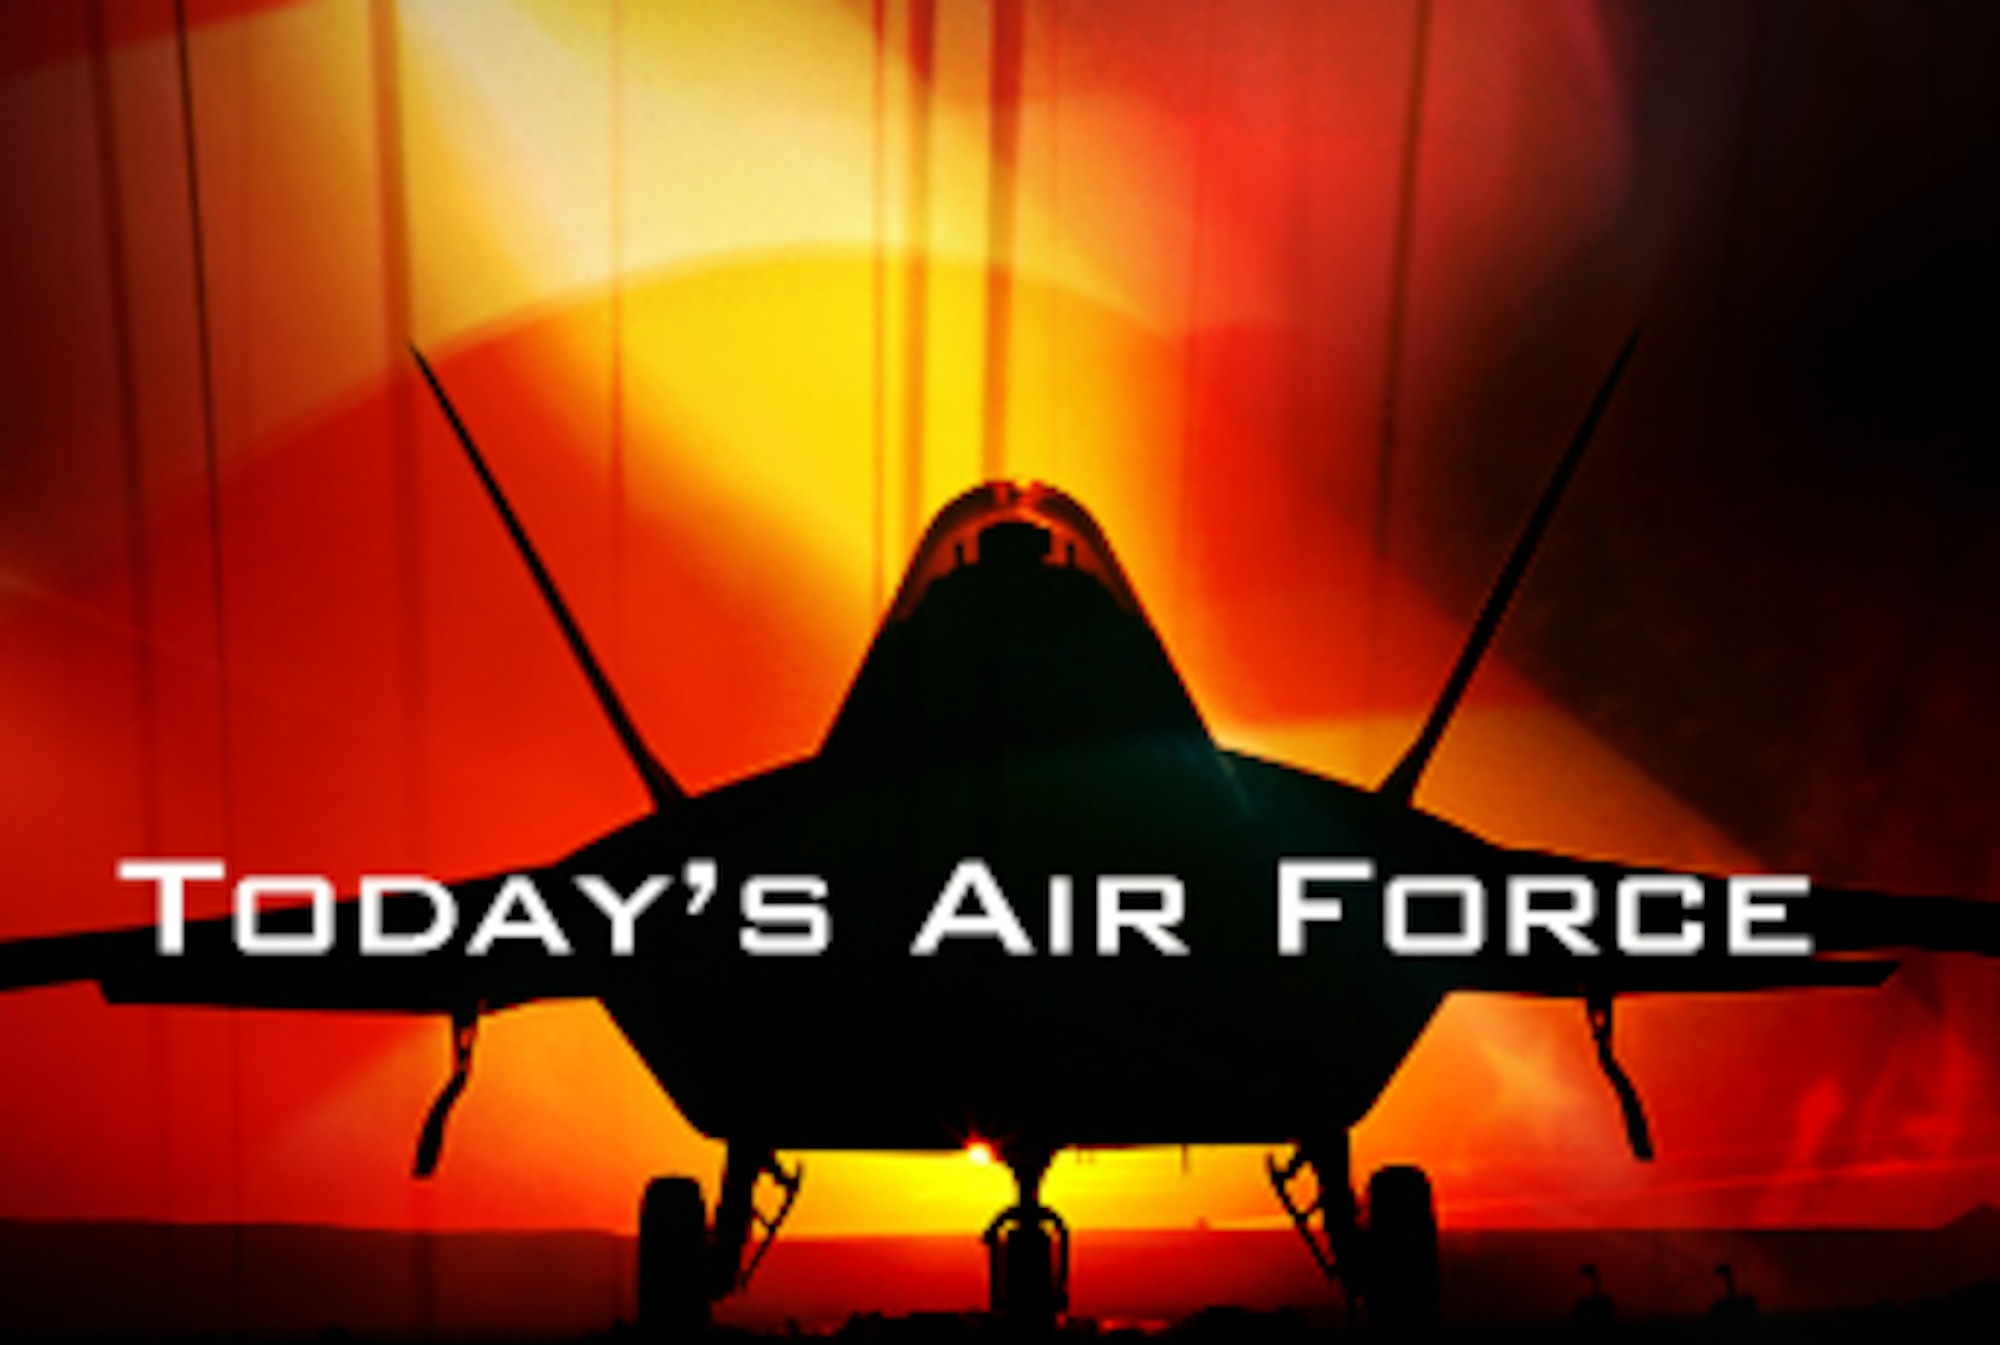 "Today's Air Force" is a long-format, weekly news show featuring in-depth stories about the Air Force's people, programs, technology, exercises, operations and more. (U.S. Air Force graphic/Mike Carabajal) 